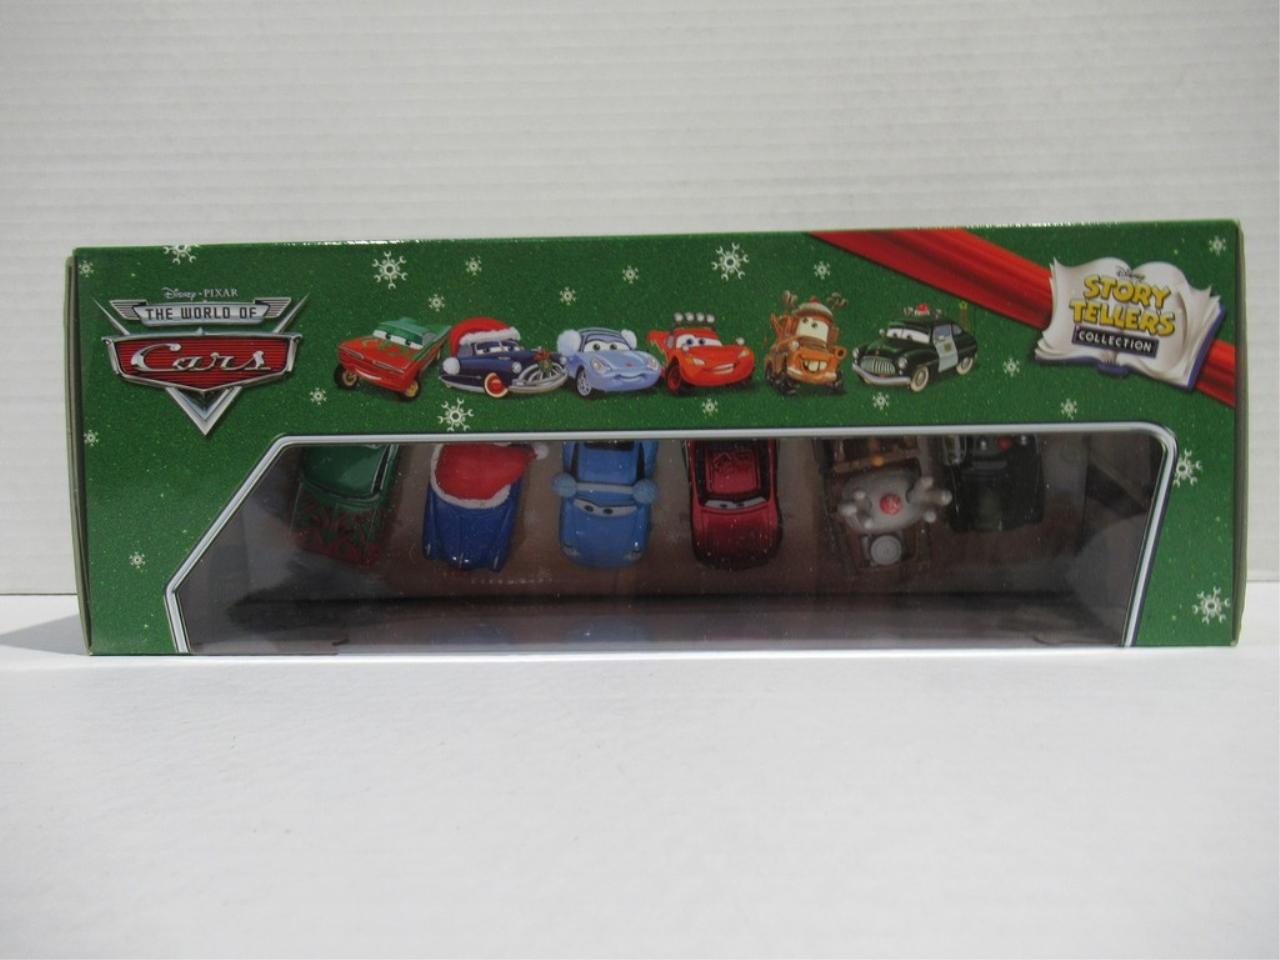 Cars Mater Saves Christmas Gift Pack